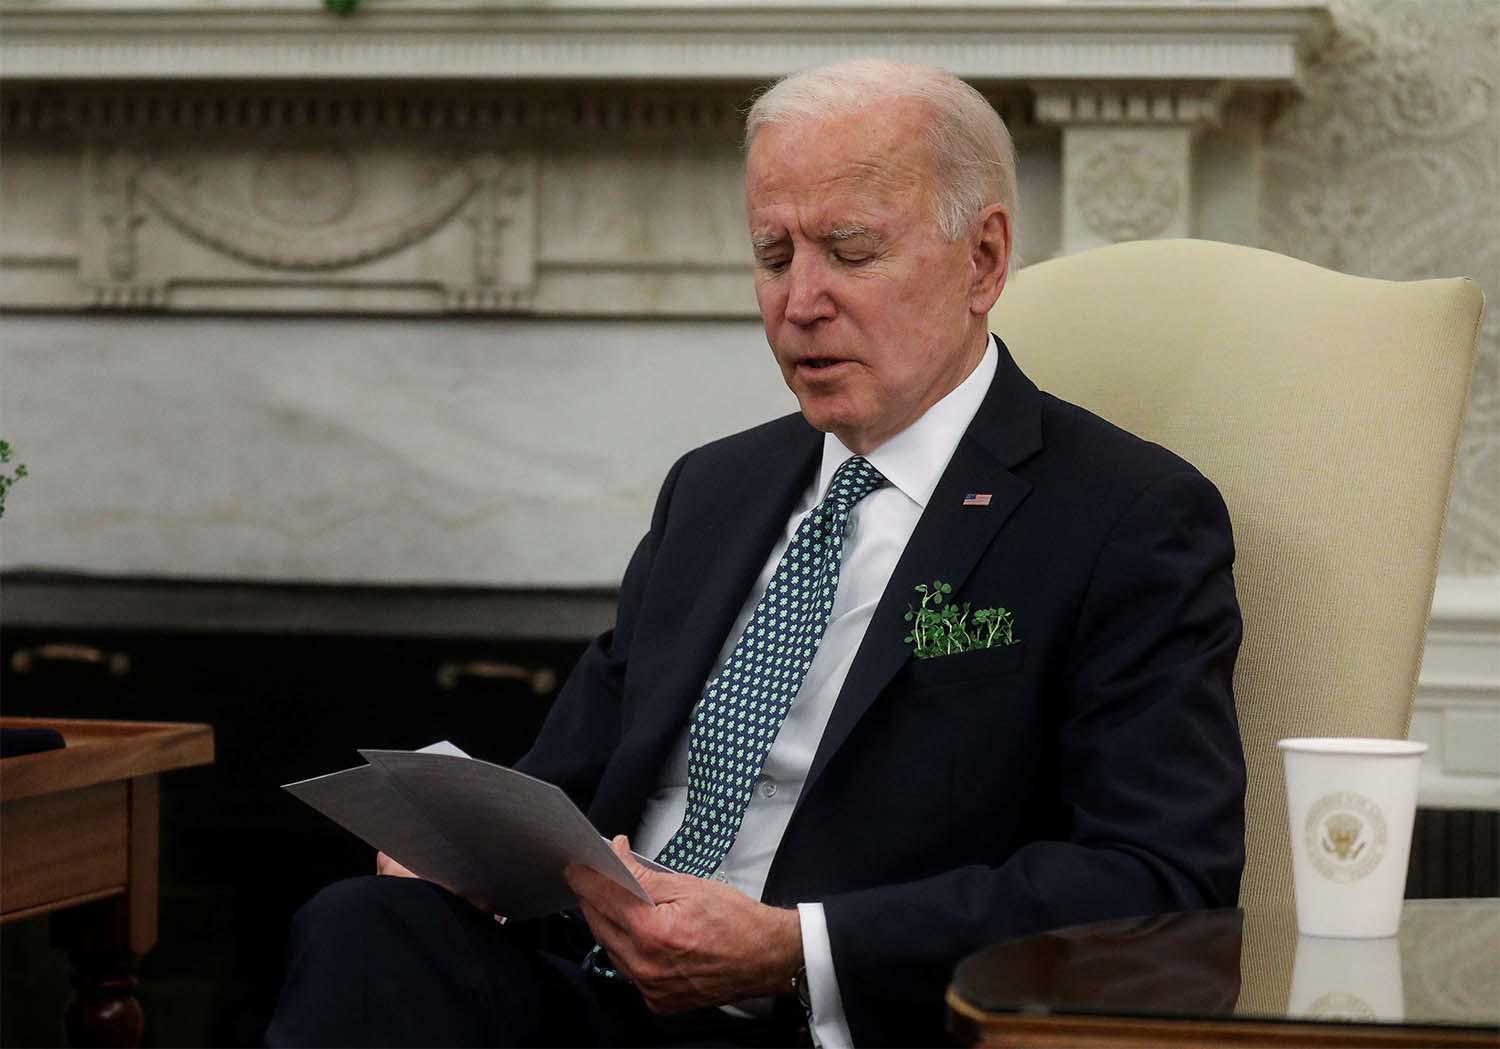 Biden administration seeks to to repair relations with the Palestinians